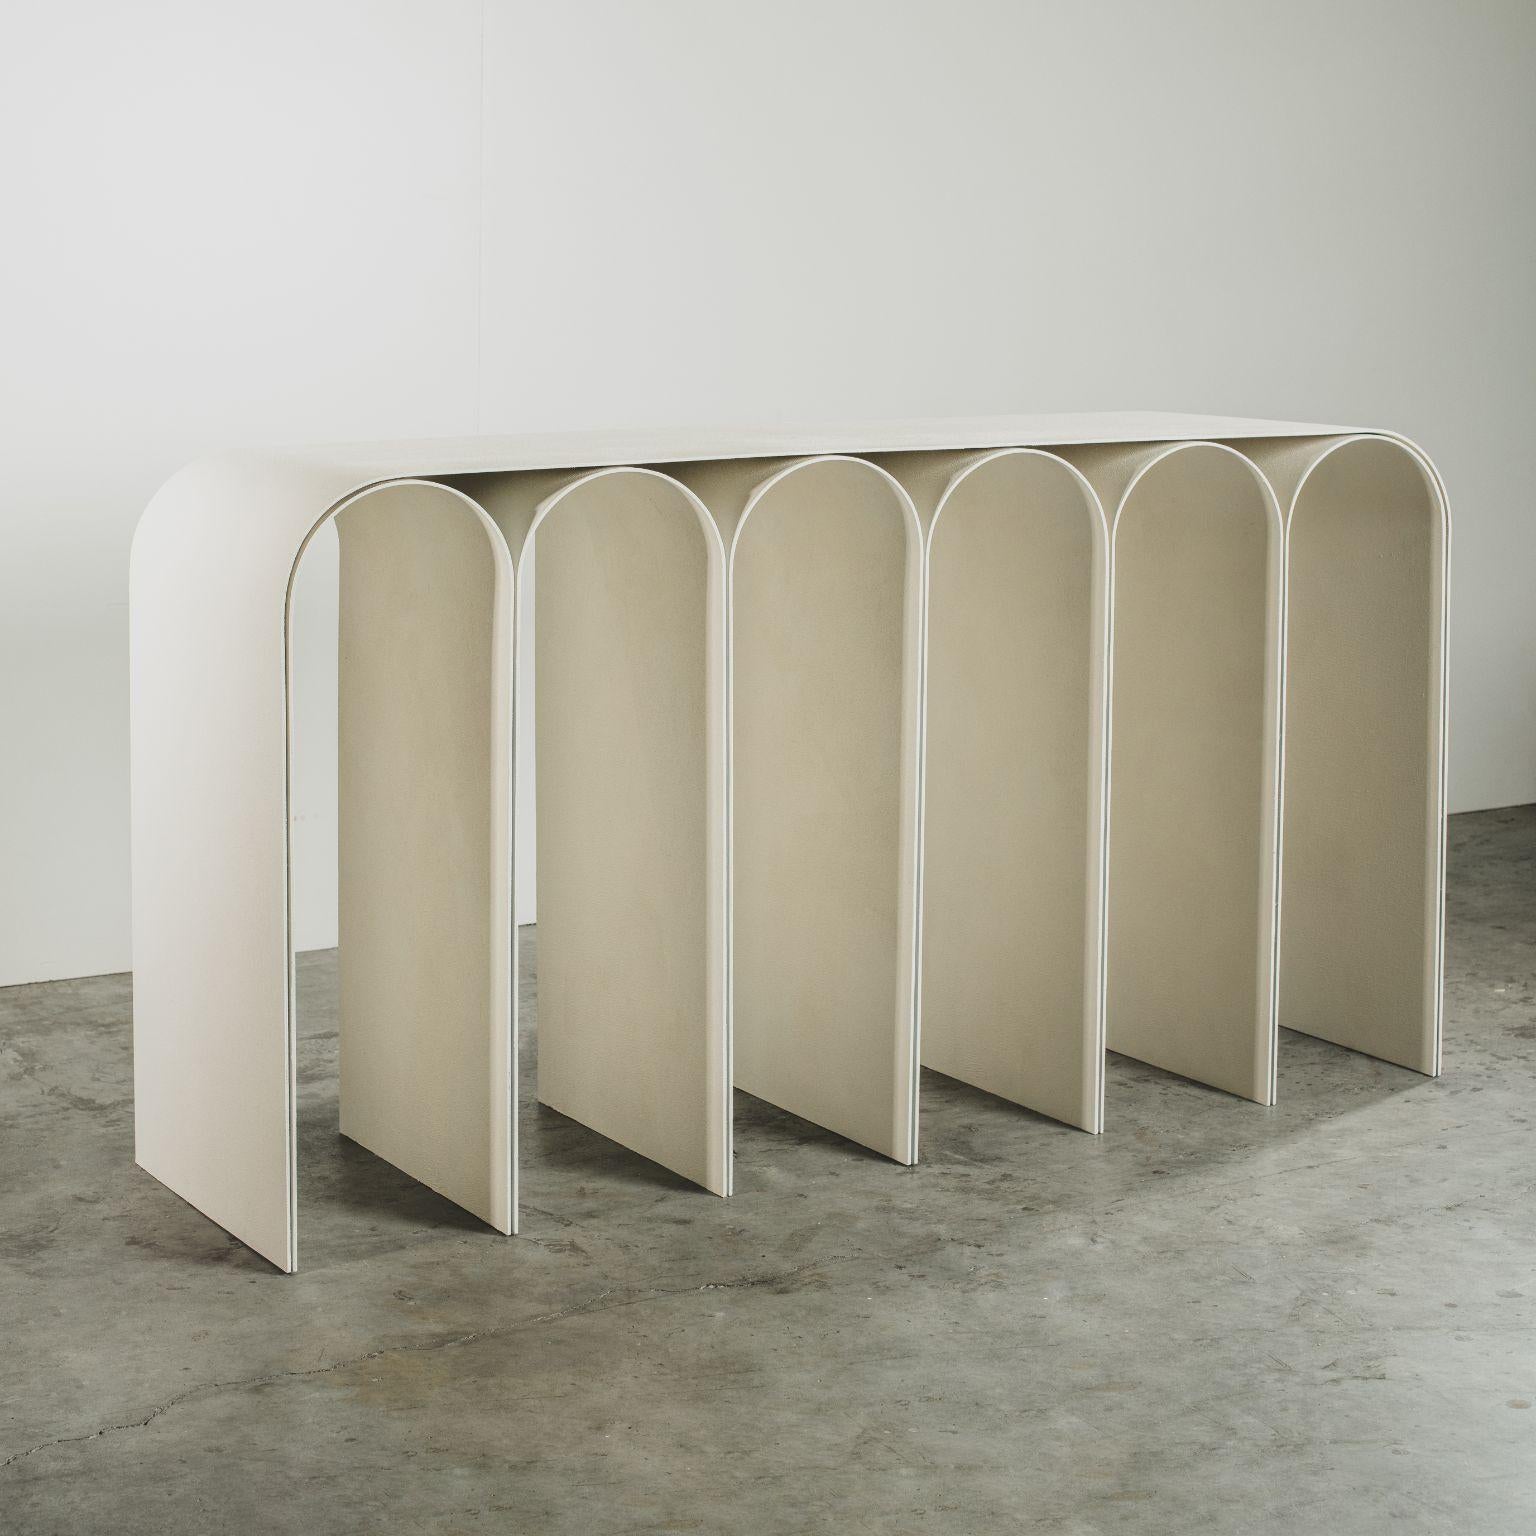 White arch console by Pietro Franceschini
Sold exclusively by Galerie Philia
Dimensions: W103cmL32cmH83
Materials: Aluminum, white plaster

Made to order dimensions can be ordered.

Also available:
Steel (brass finish, blackened, satin,